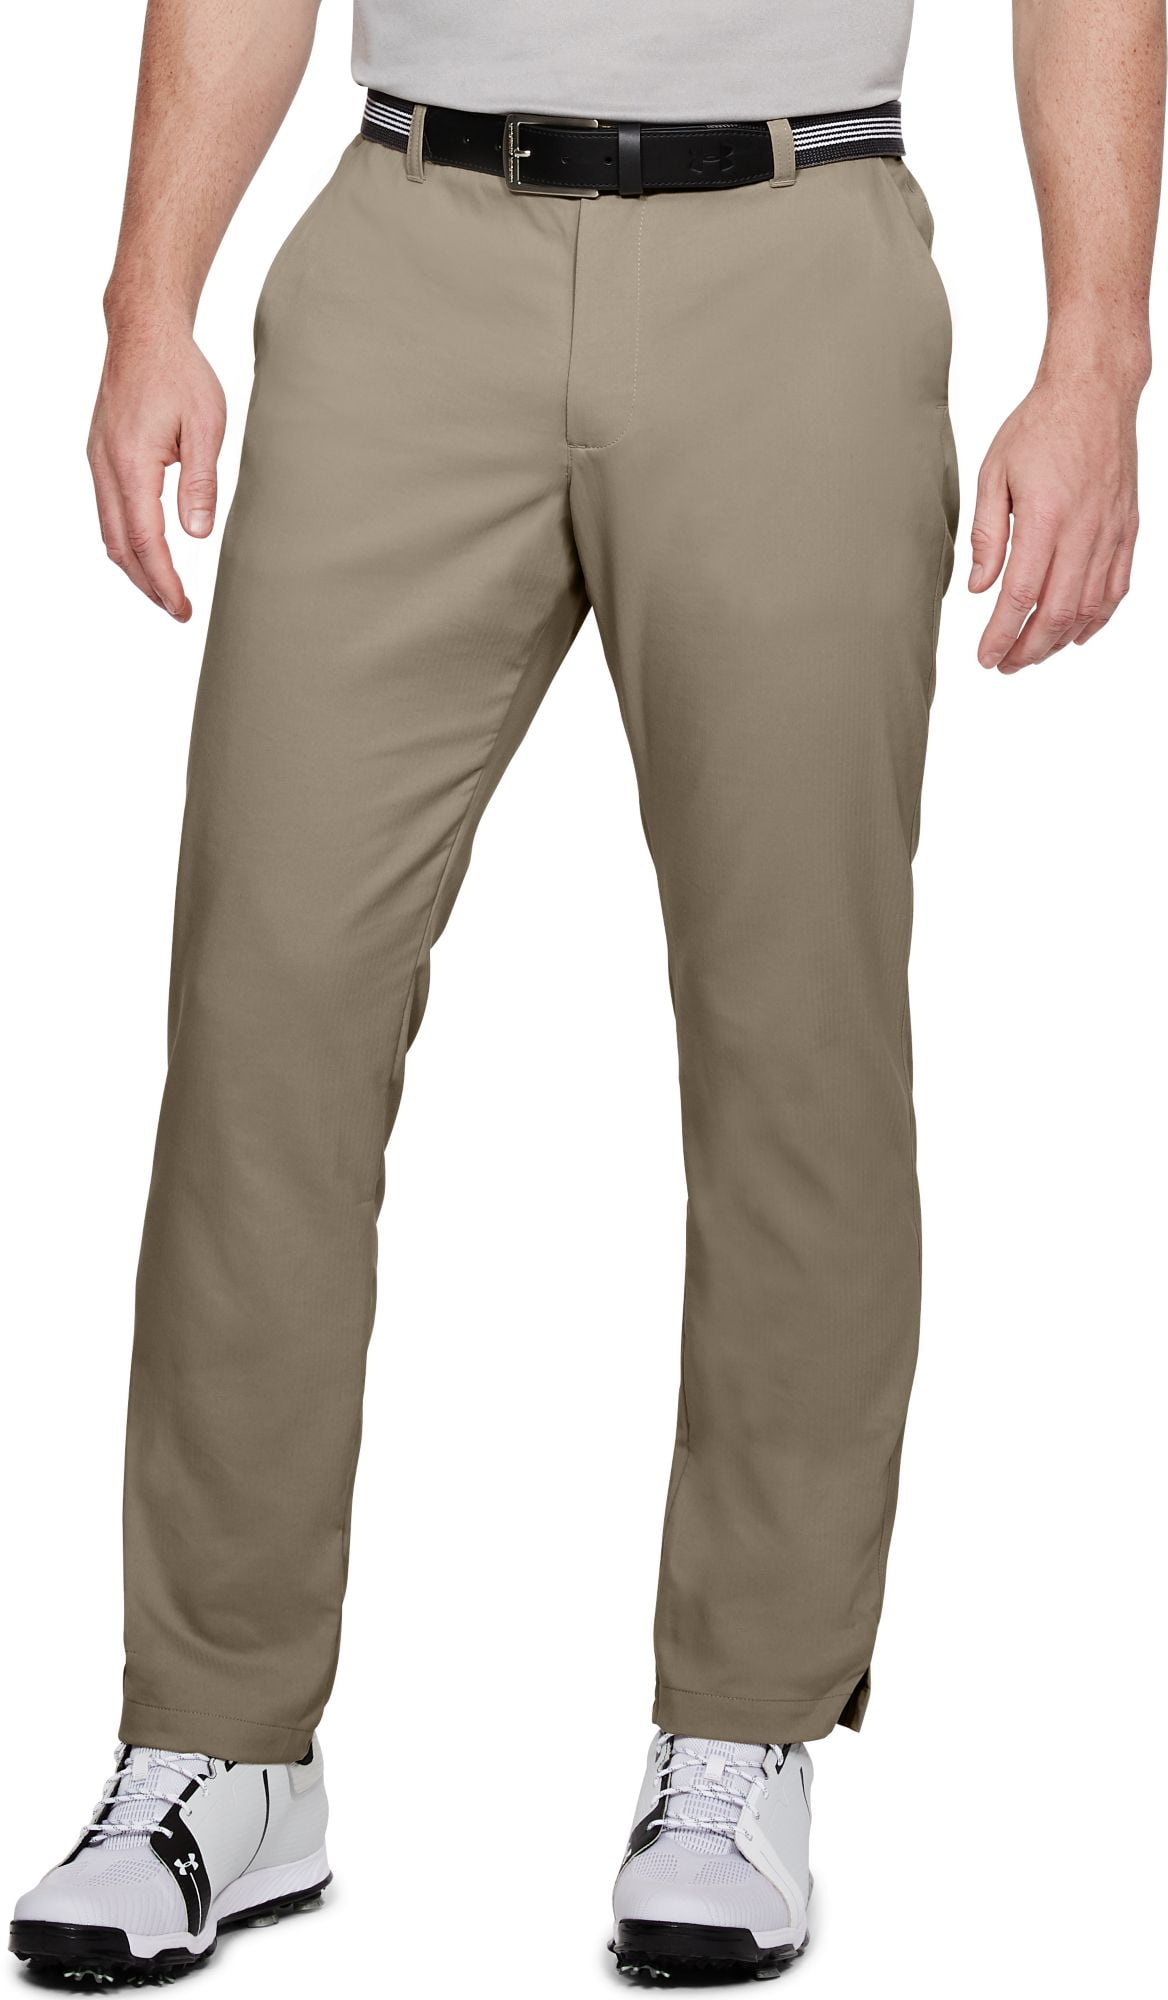 Under Armour - under armour men's show down straight golf pants ...